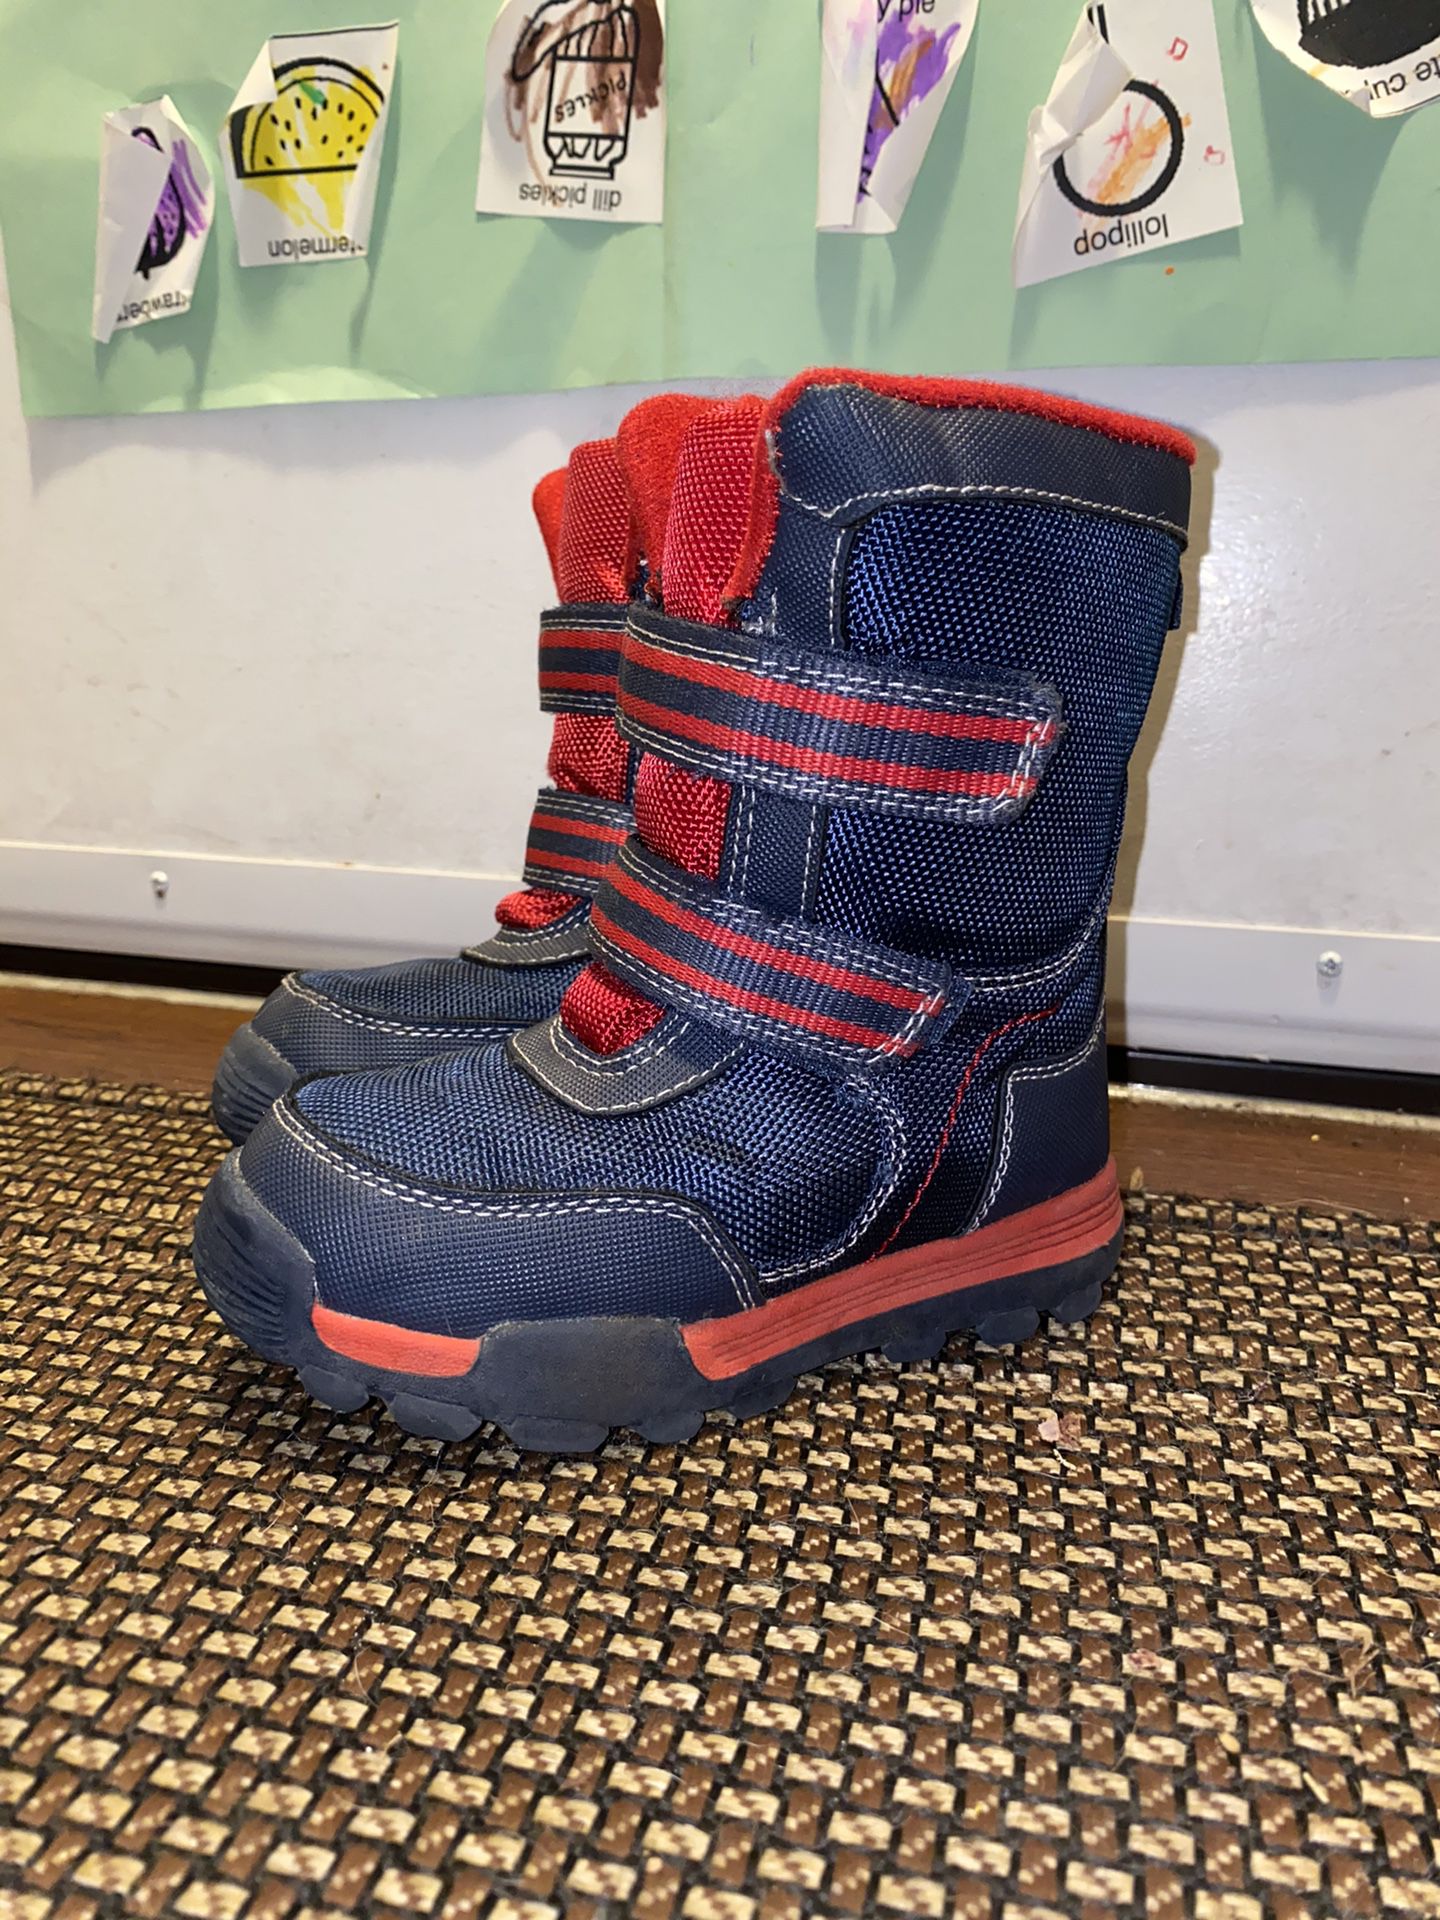 ⛄️ SIZE 9 Kids Snow Boots size like new